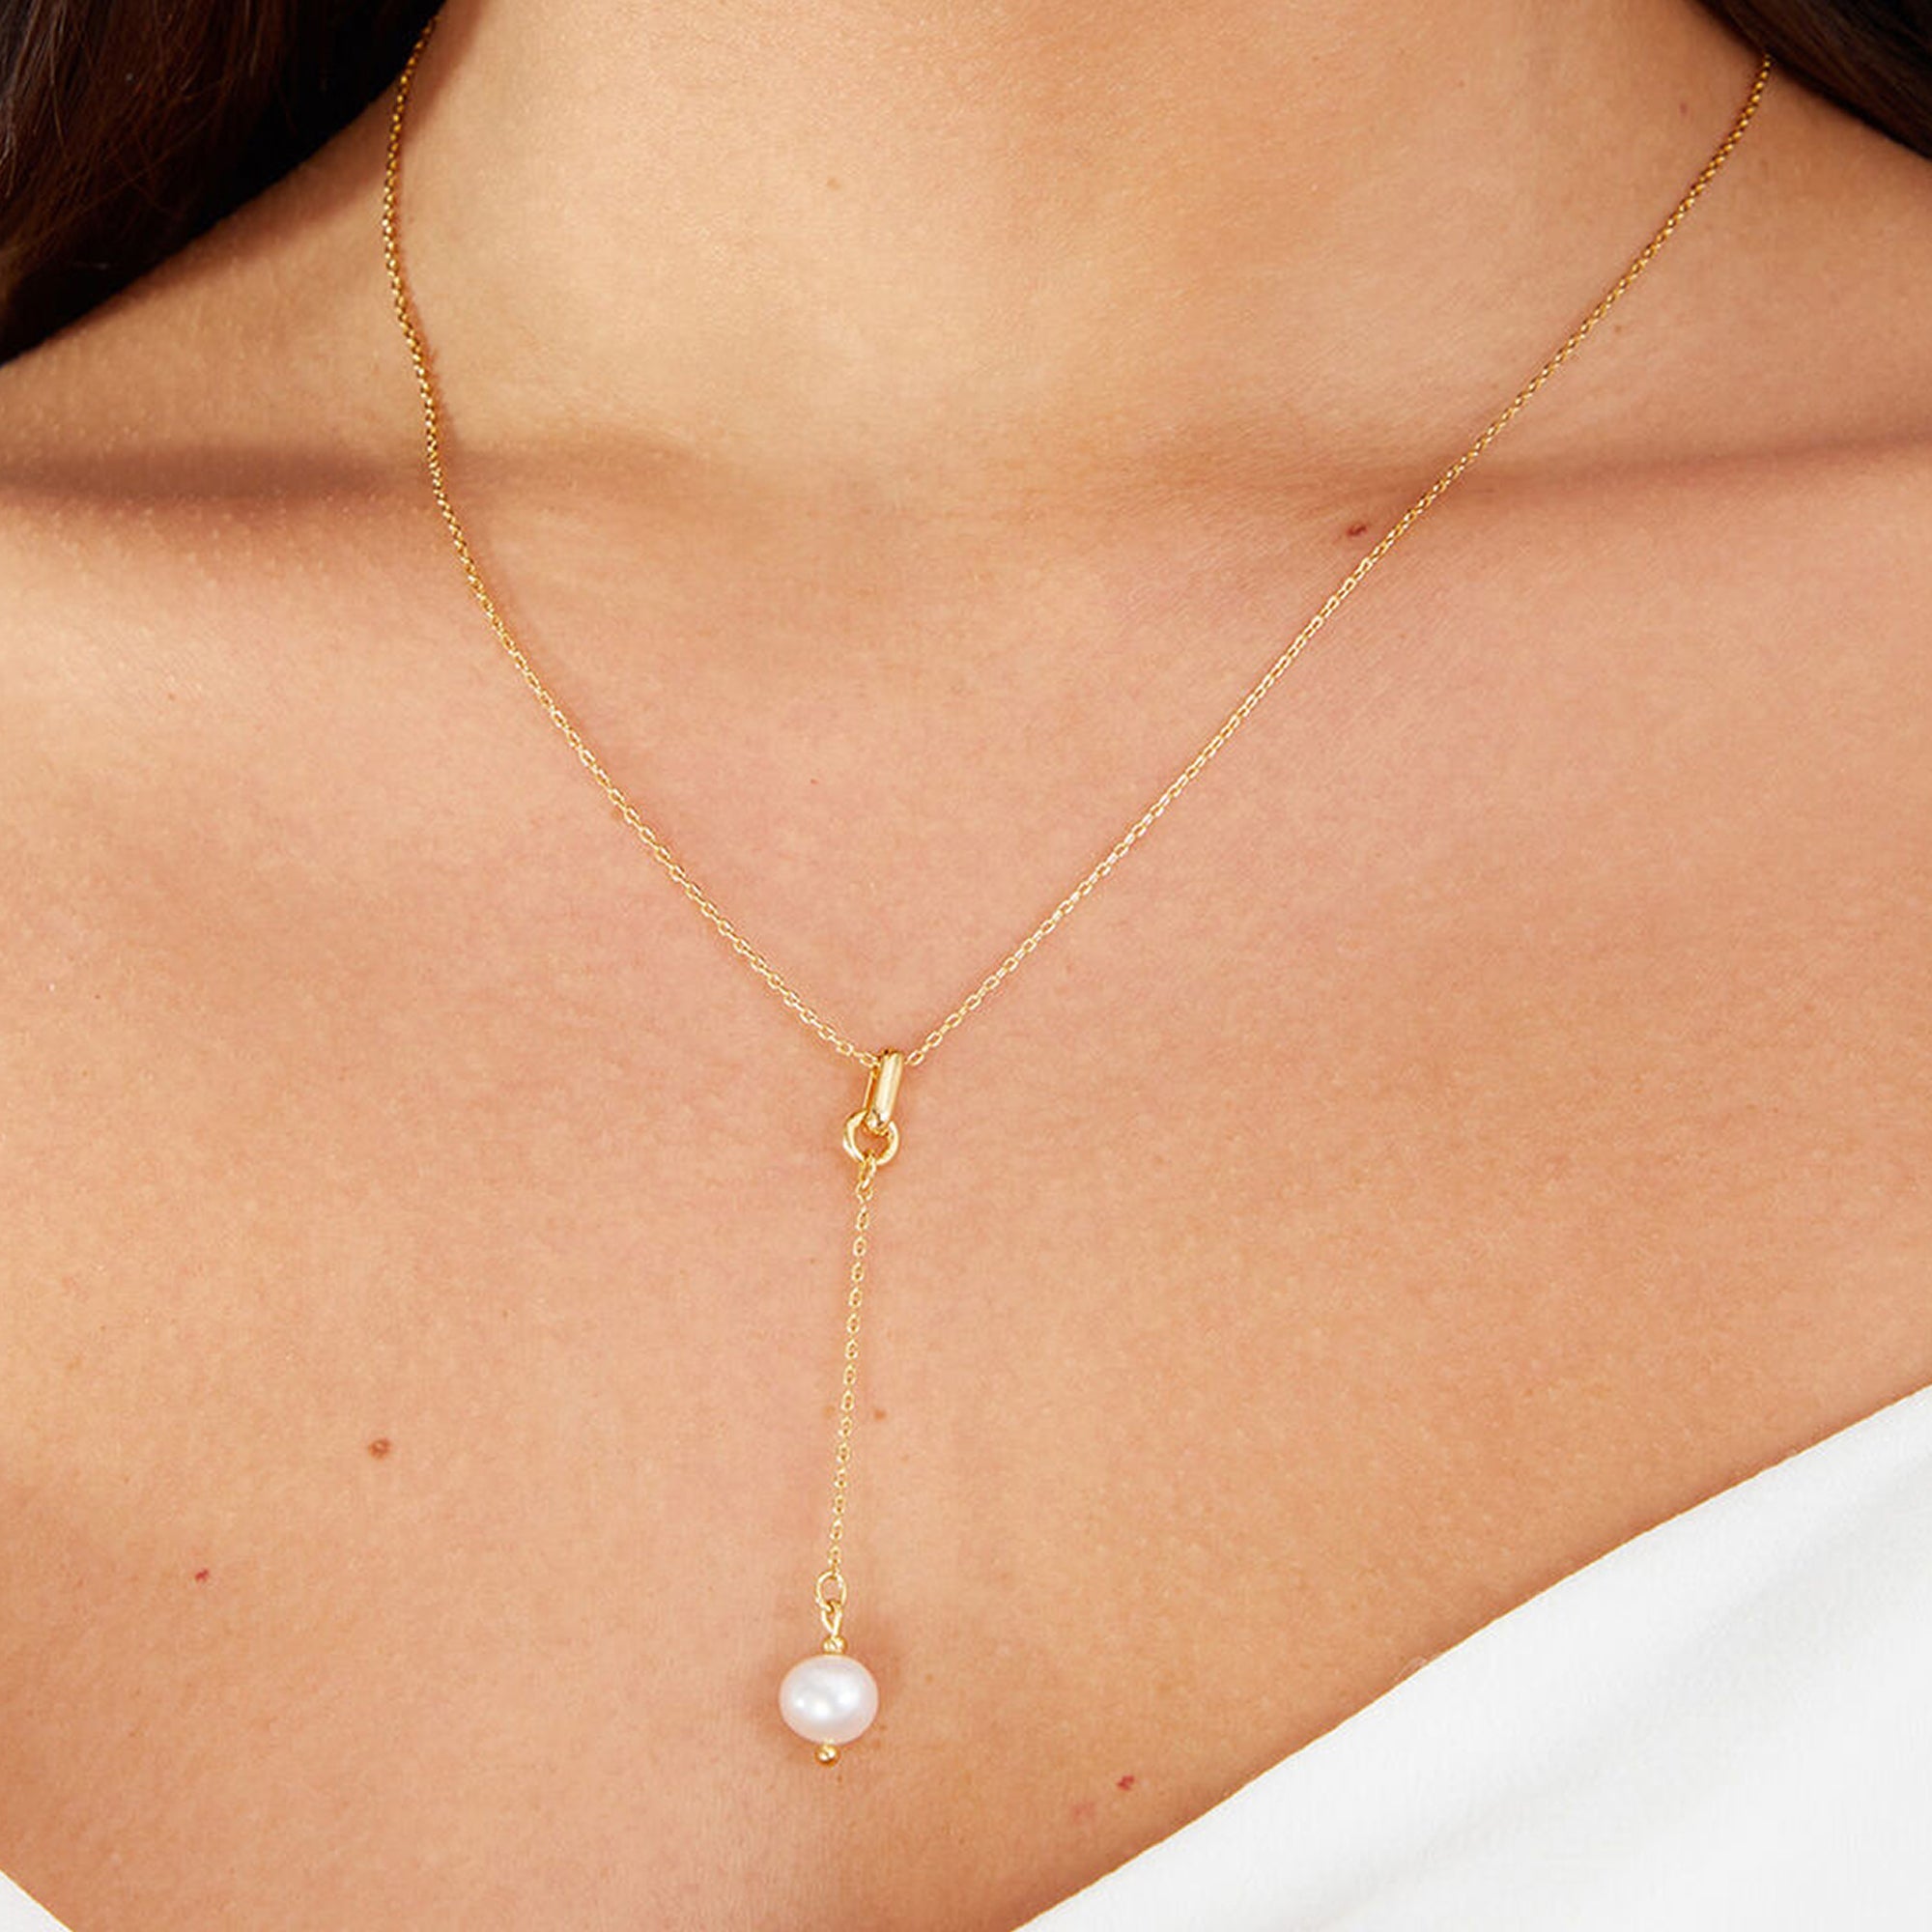 Best Pearl Pendant Gold Necklace Jewelry Gift | Best Aesthetic Yellow Gold Pearl  Pendant Necklace Jewelry Gift for Women, Mother, Wife - Mason & Madison Co.